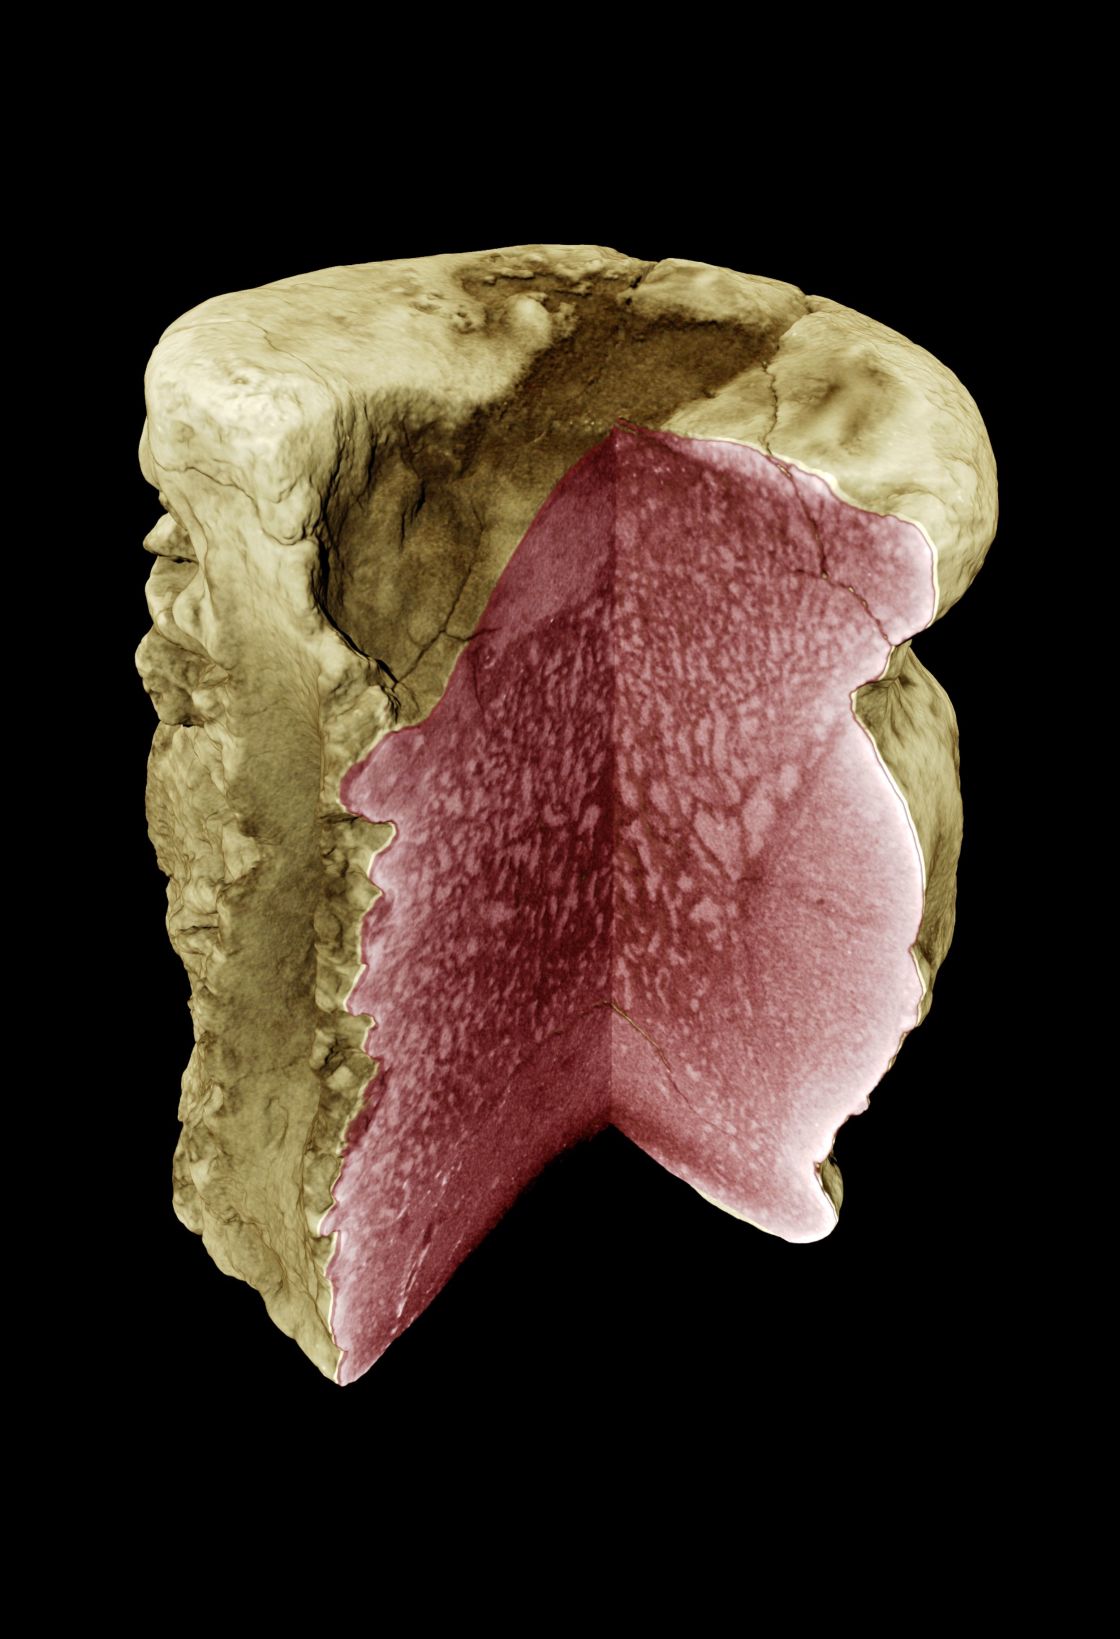 Synchrotron holotomography was used to visualise pathological structural changes in a dinosaur bone - enlarged view